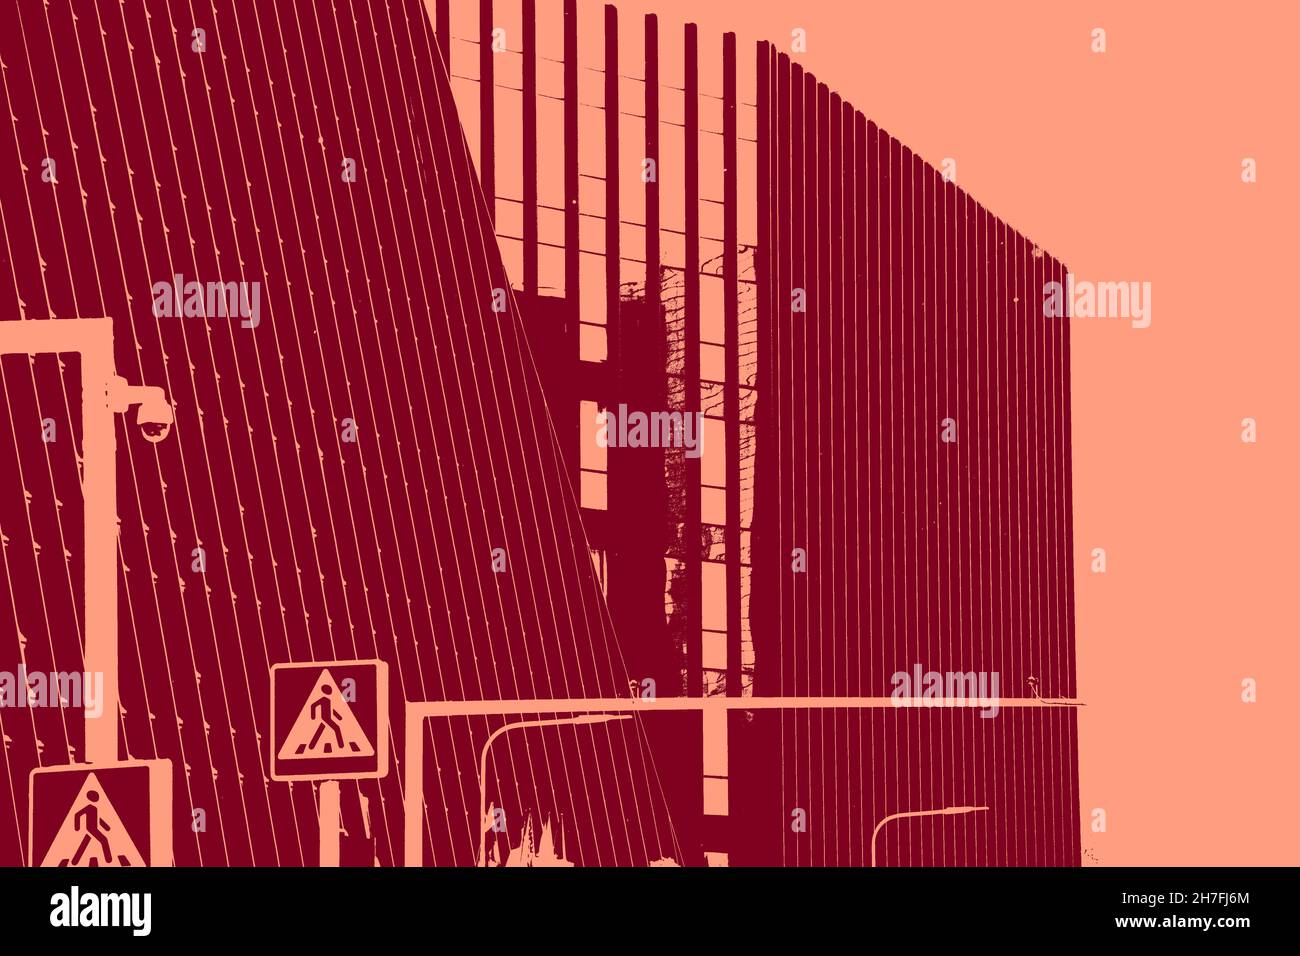 duotone graphic of city buildings in red and pink. Business city landscape Stock Photo